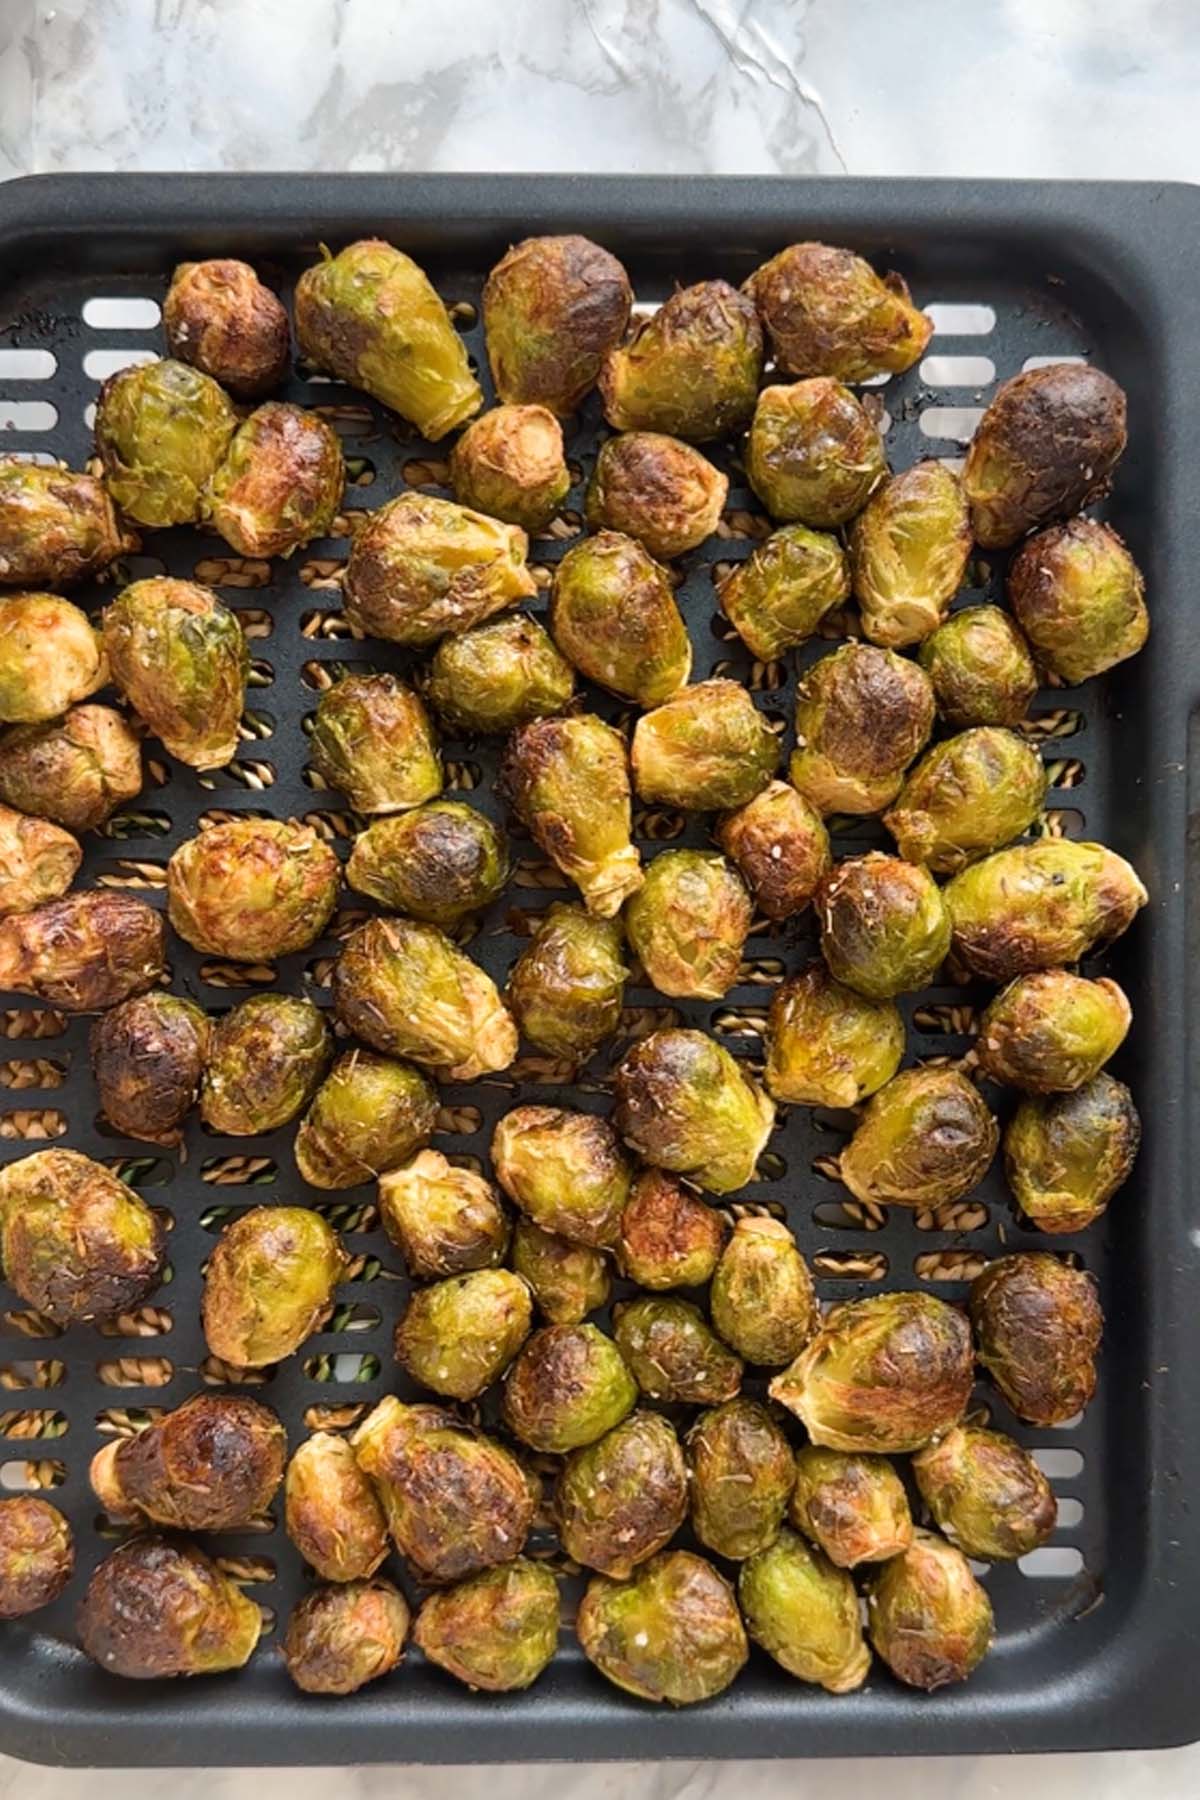 Cooked Brussels sprouts on an air fryer tray.